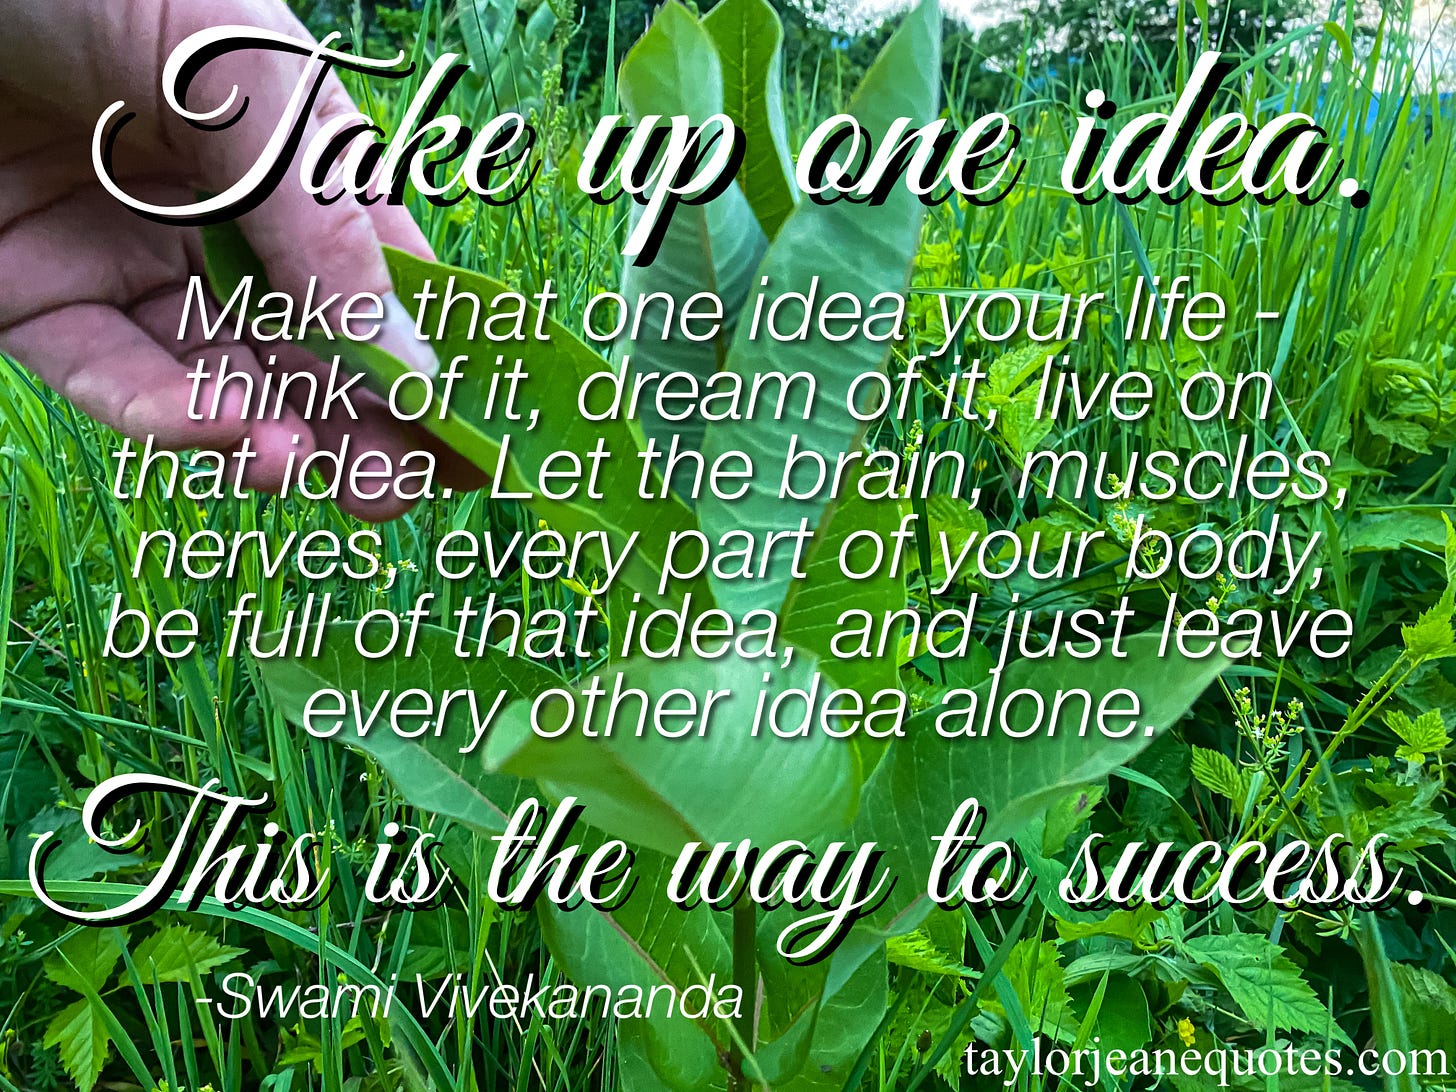 taylor jeane quotes, taylor jeane, taylor wilson, free quote of the day, daily quote of the day email subscription free, swami vivekananda, swami vivekananda quotes, motivational quotes, inspirational quotes, empowering quotes, idea quotes, prioritize quotes, prioritize life quotes, goal quotes, goal setting quotes, achieve your goals quotes, dream quotes, prioritization quotes, productivity quotes, success habit quotes